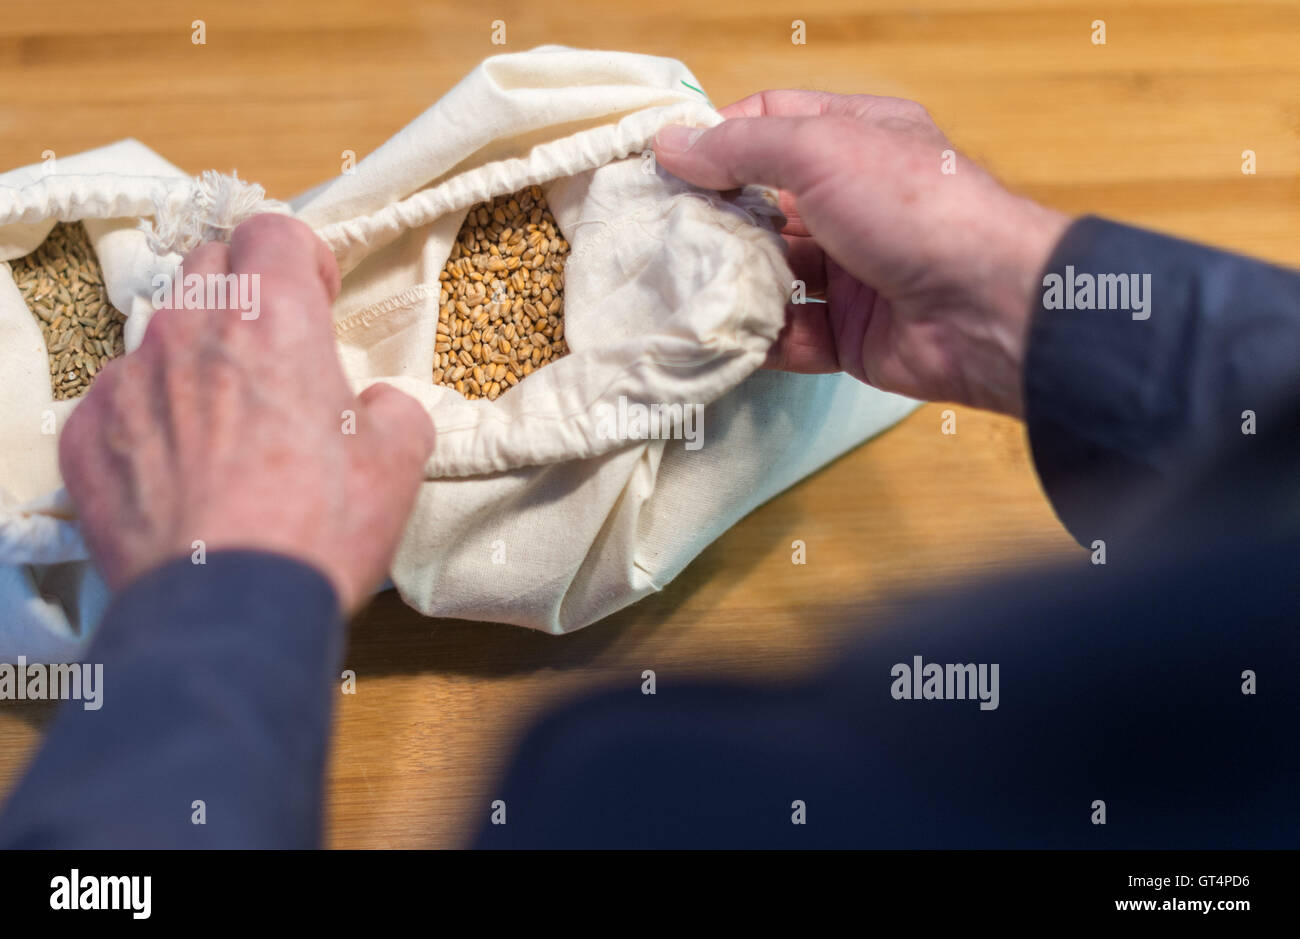 Hanover, Germany. 1st Sep, 2016. A man holding a bag of corn at the store 'Edel Unverpackt' (lit. 'Noble Unpacked') in Hanover, Germany, 1 September 2016. The store offers food and household goods without packaging. PHOTO: SEBASTIAN GOLLNOW/dpa/Alamy Live News Stock Photo